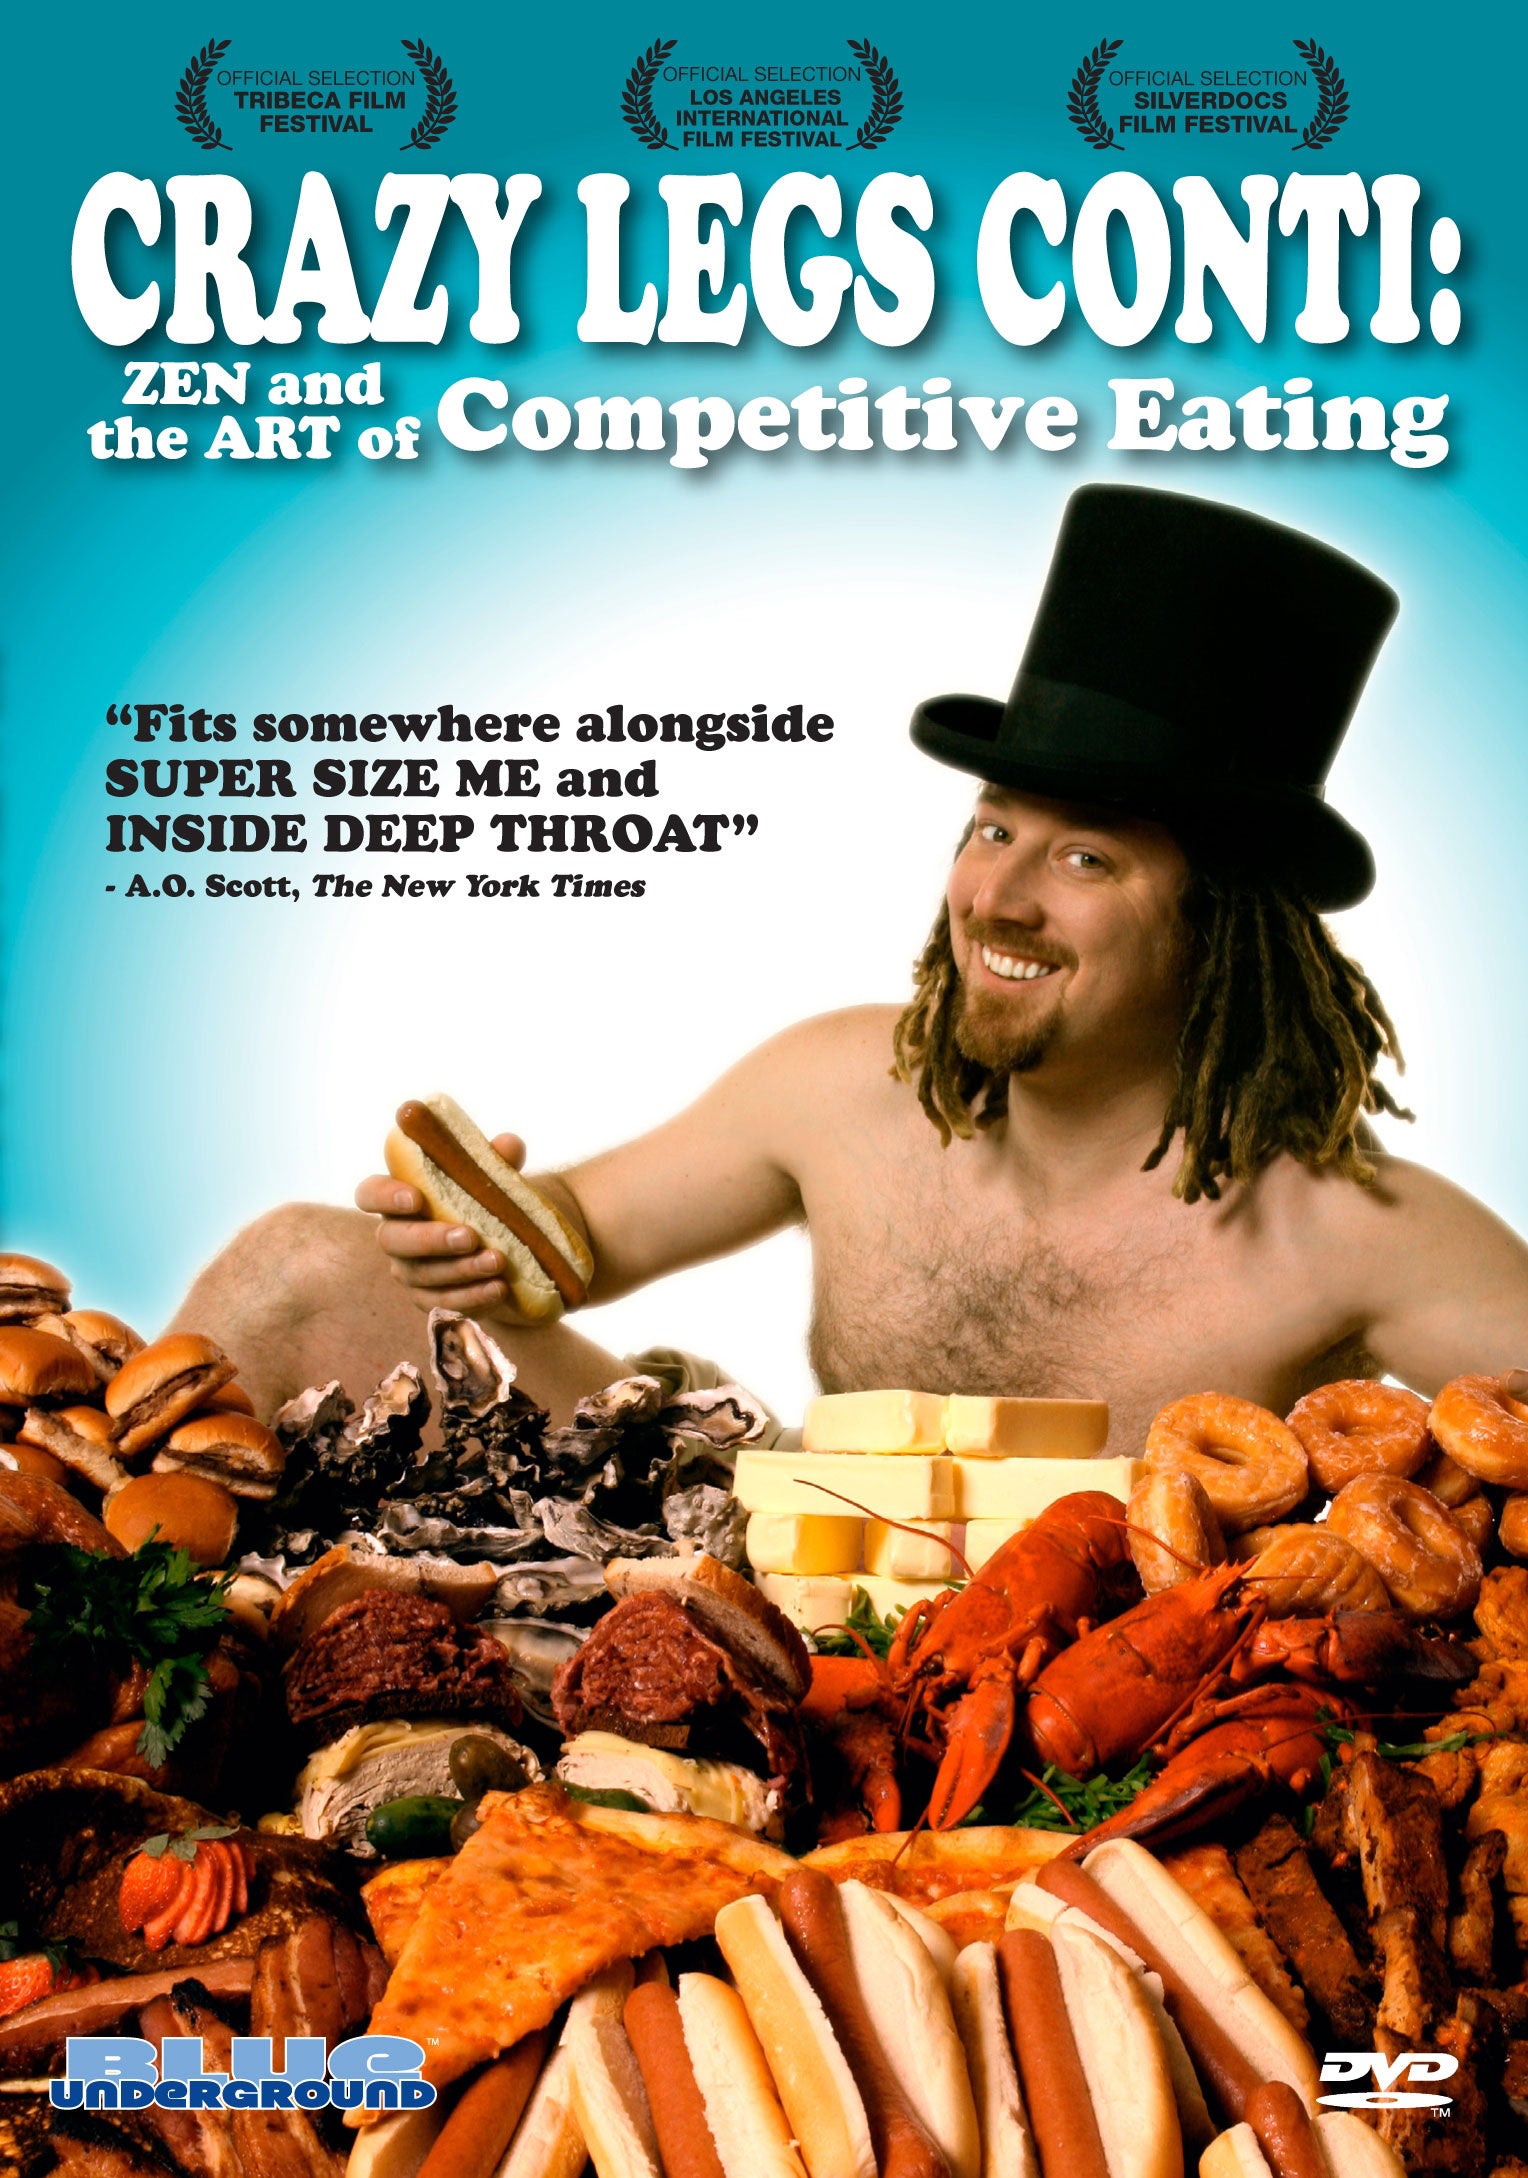 CRAZY LEGS CONTI: ZEN AND THE ART OF COMPETITIVE EATING DVD